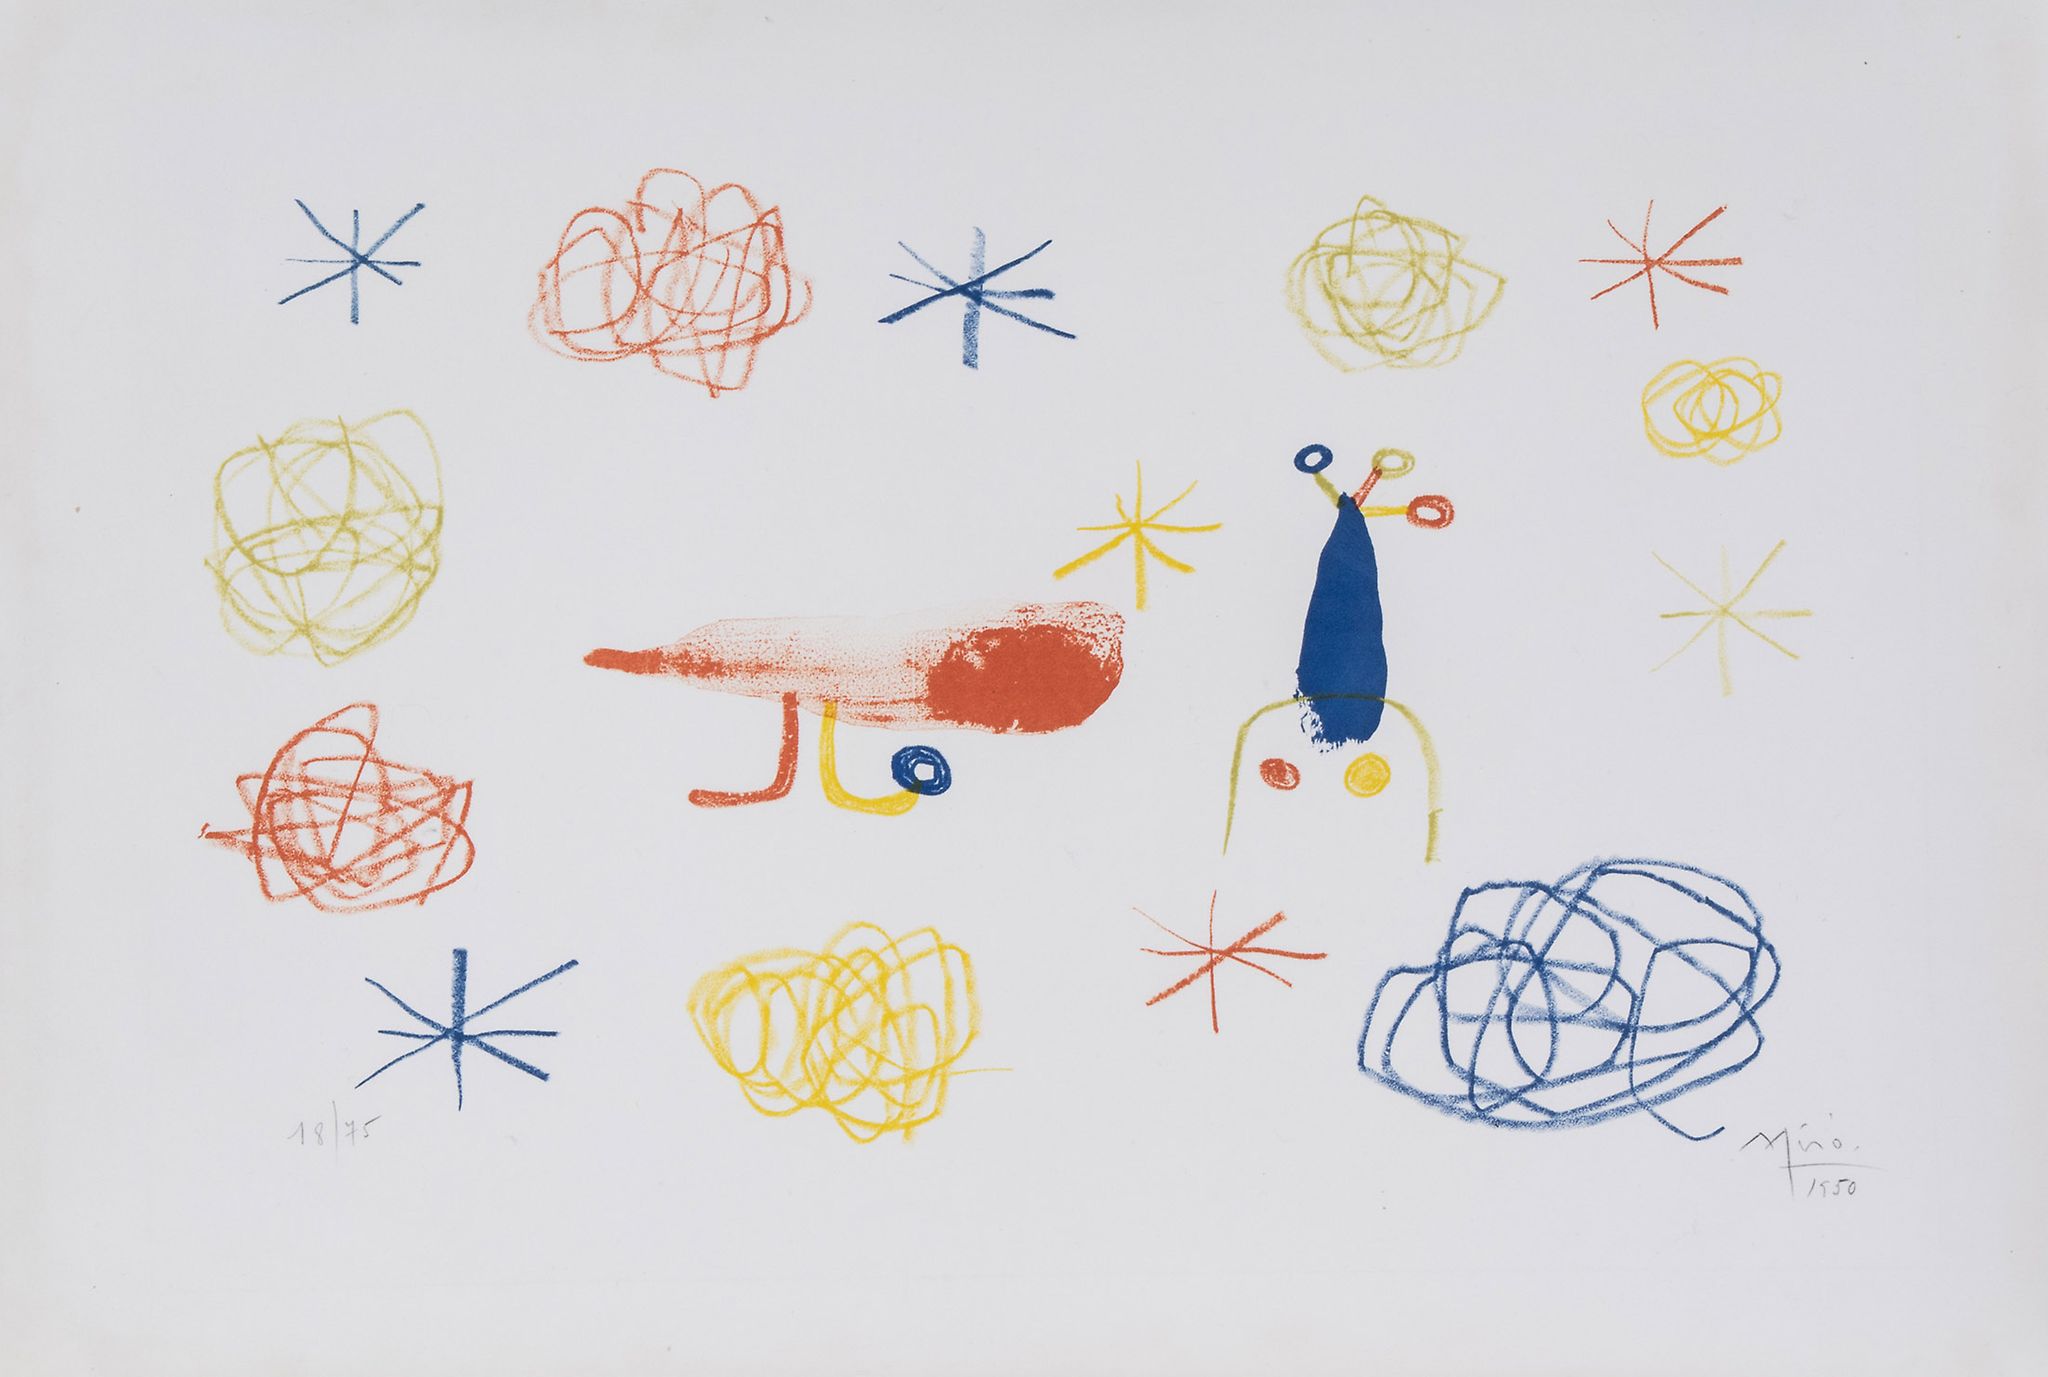 Joan Miró (1893-1983) - The Red Bird II (M.99) lithograph printed in colours, 1950, signed and dated